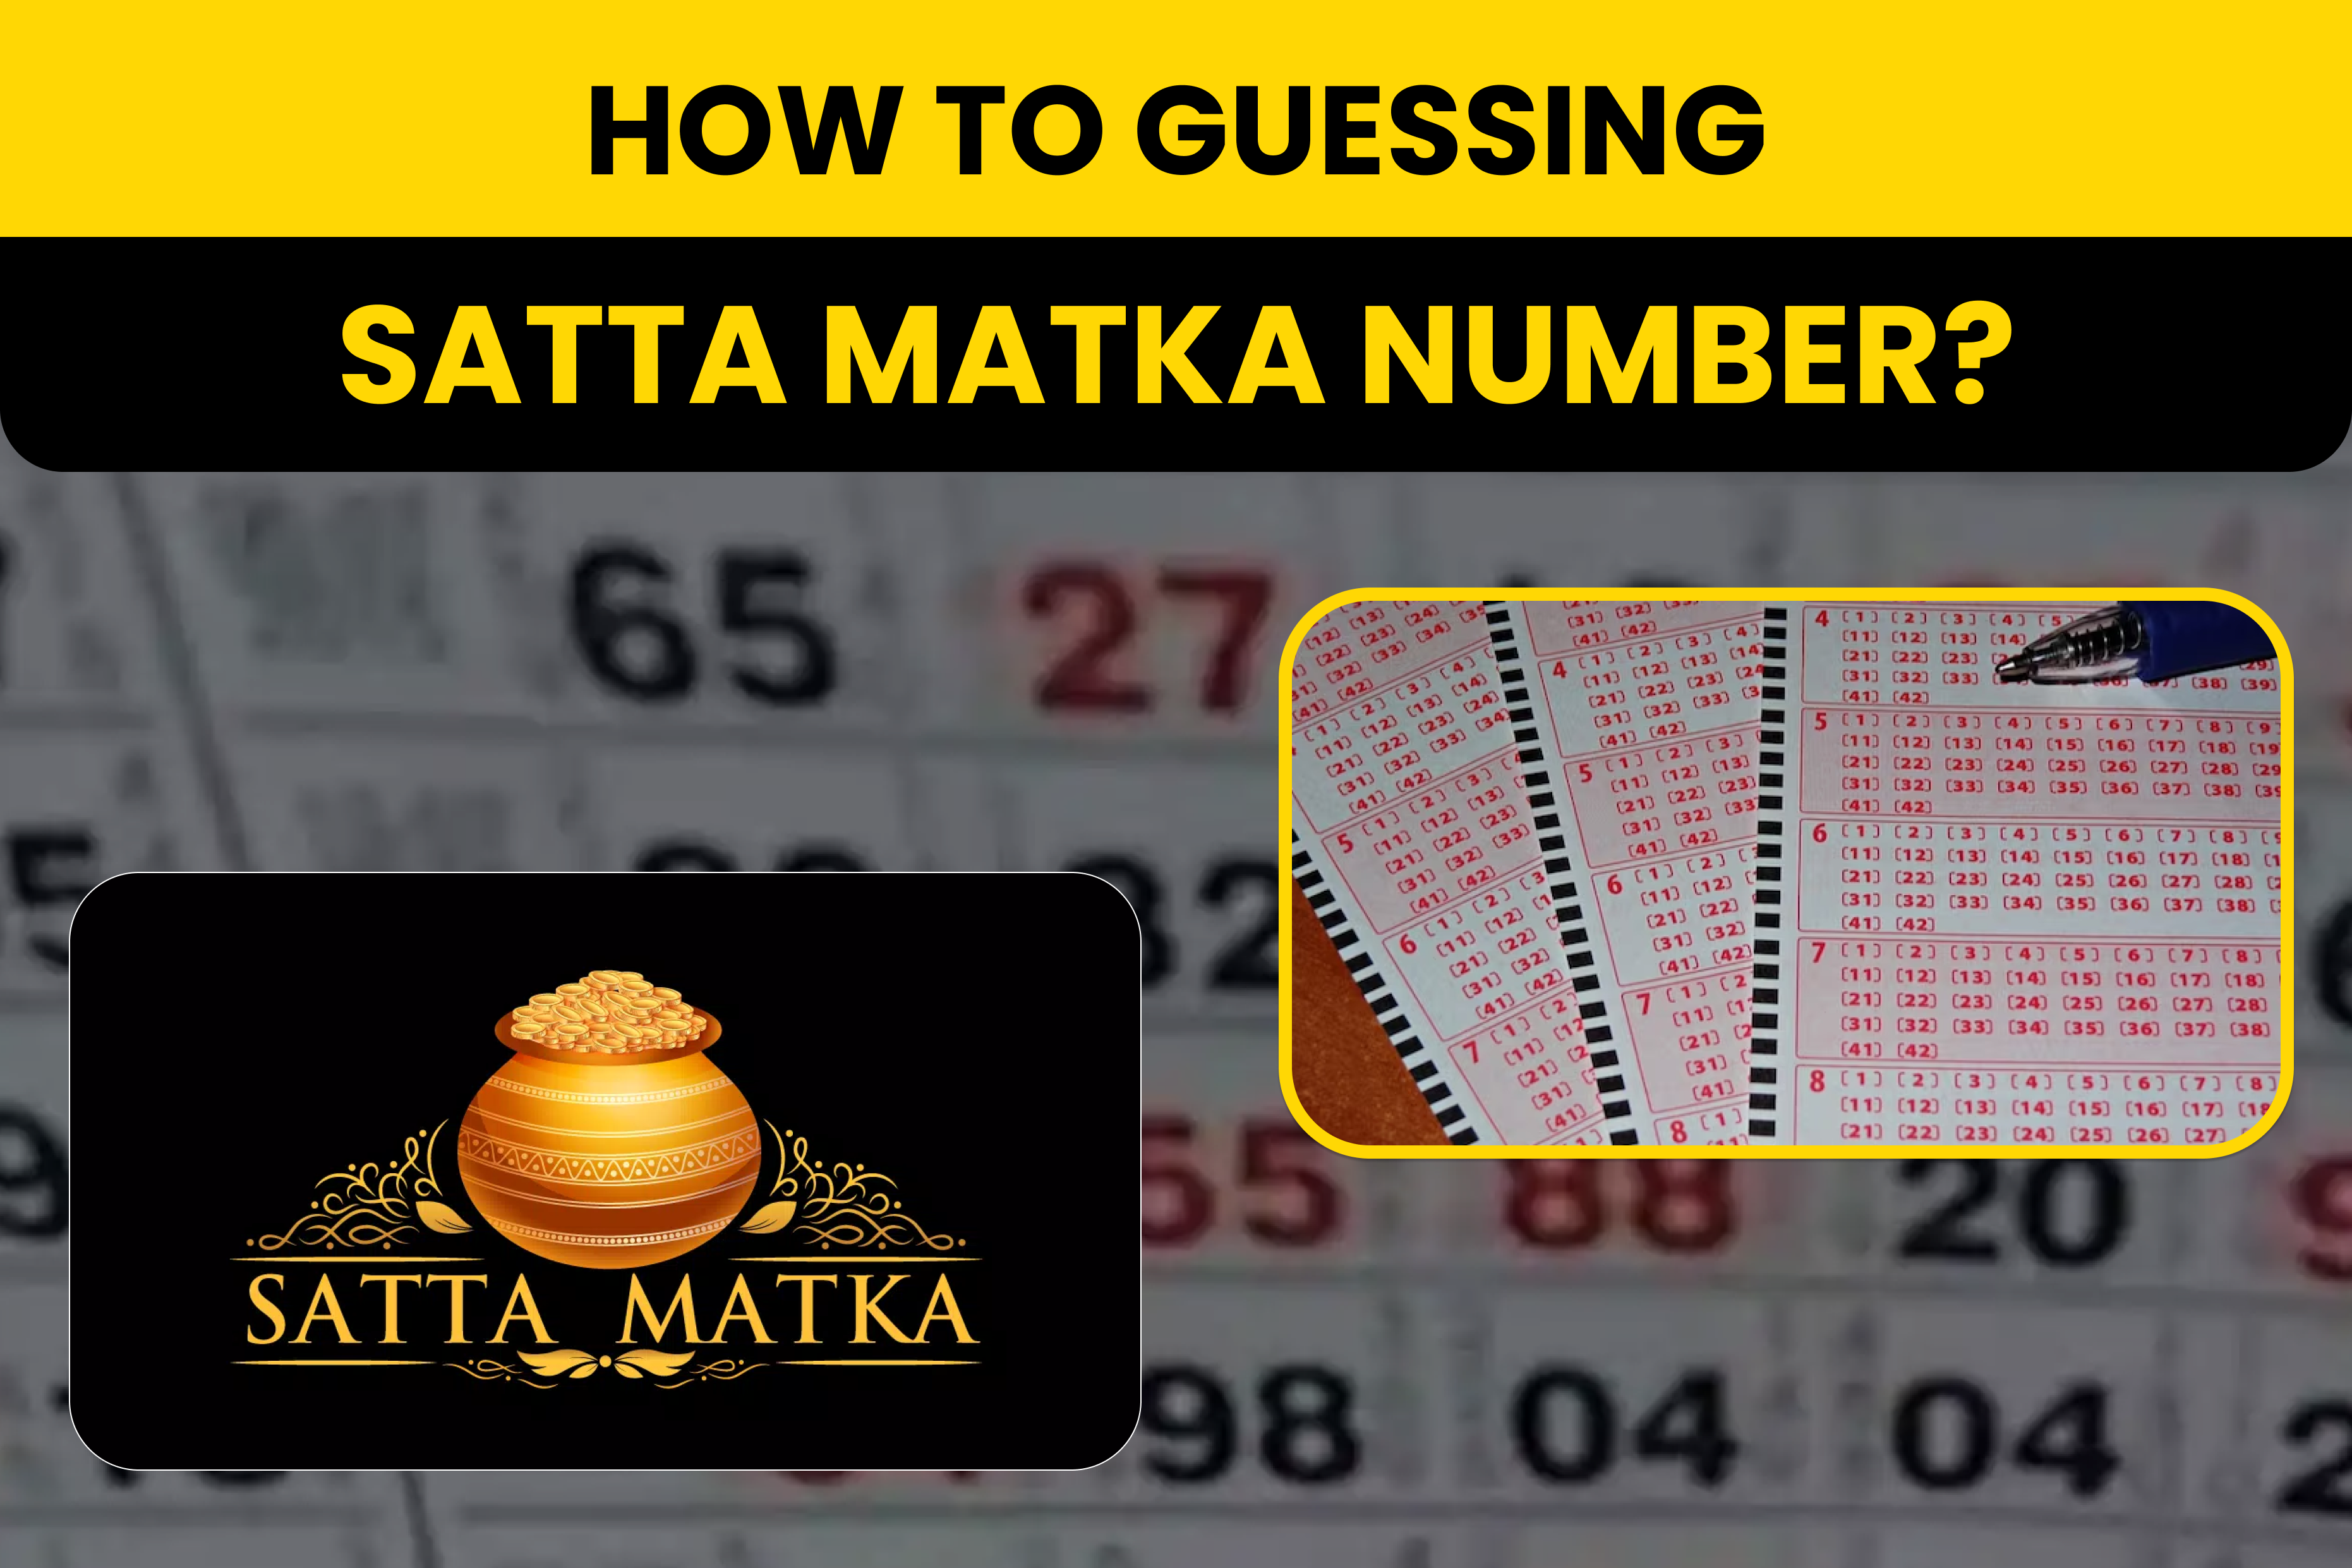 How to guess the matka satta number?